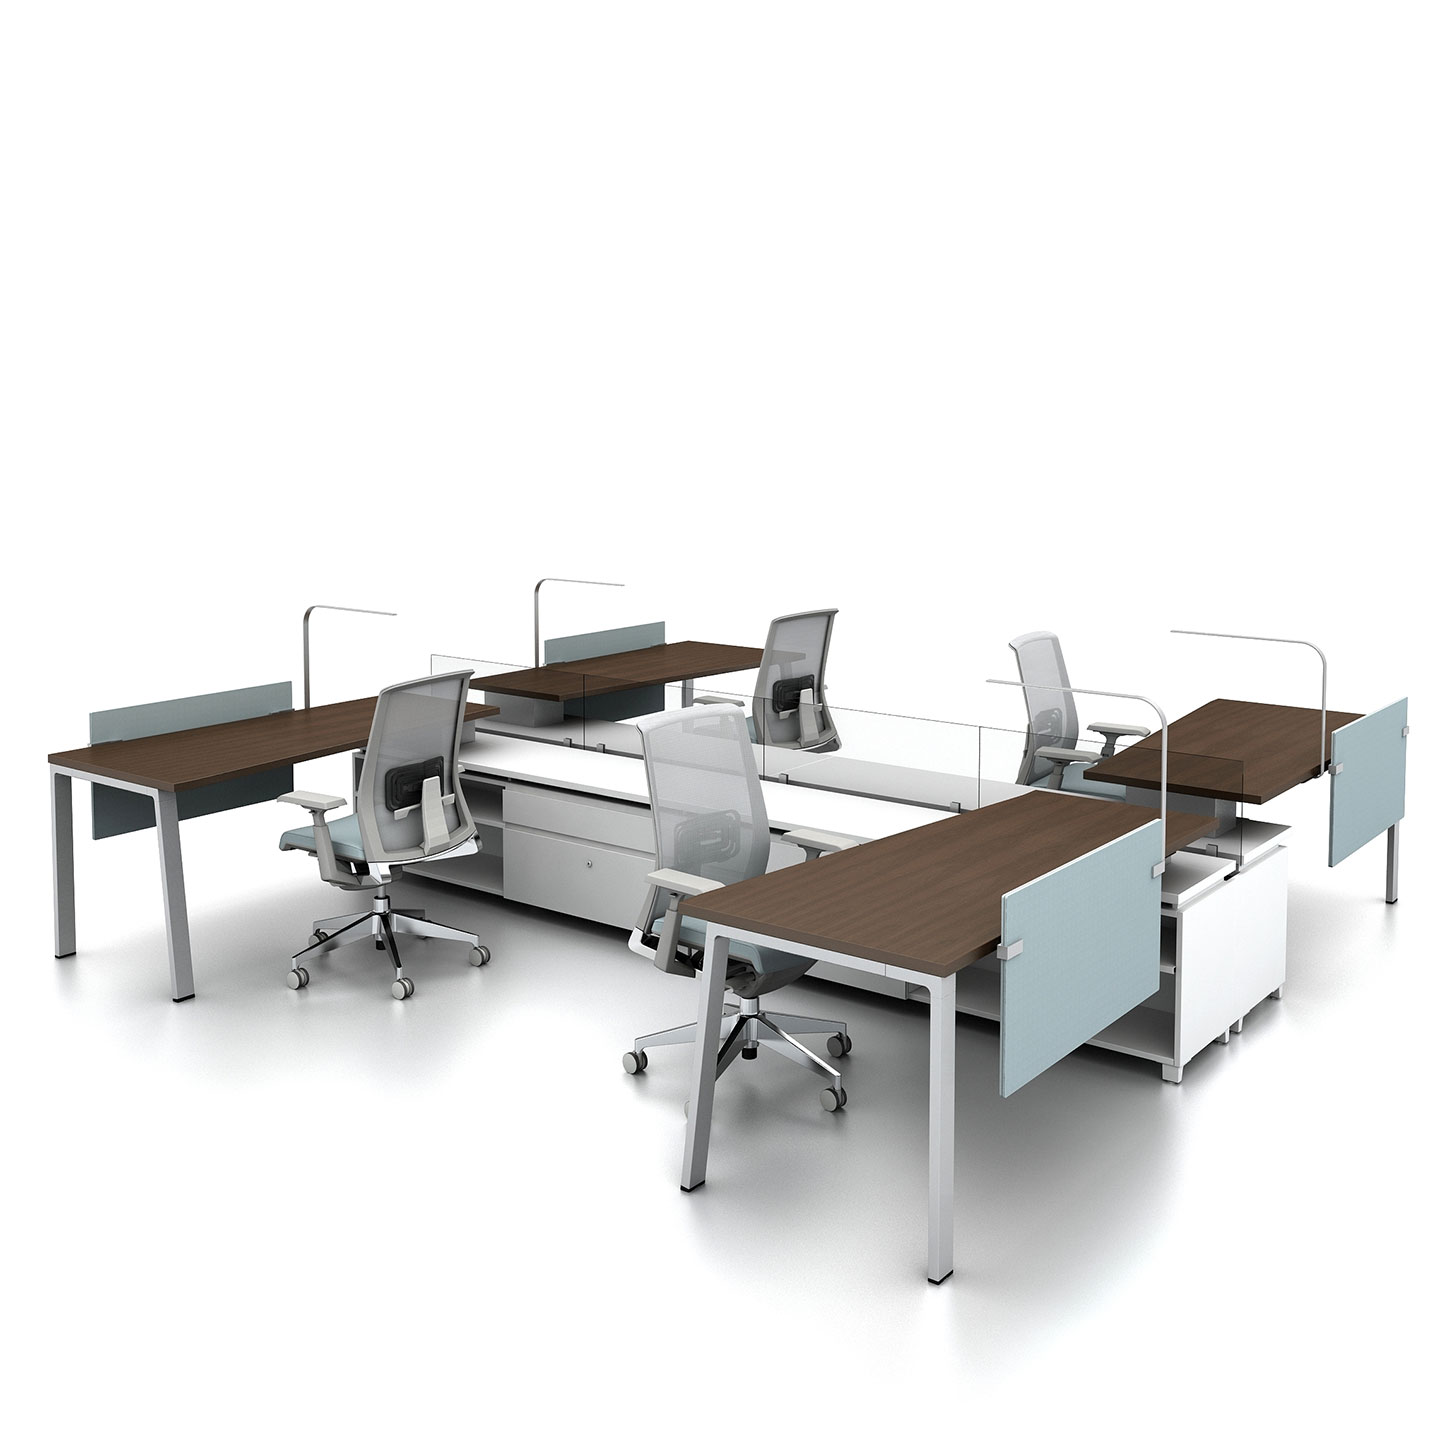 Haworth Belong Screen in light blue on office desks with dividers